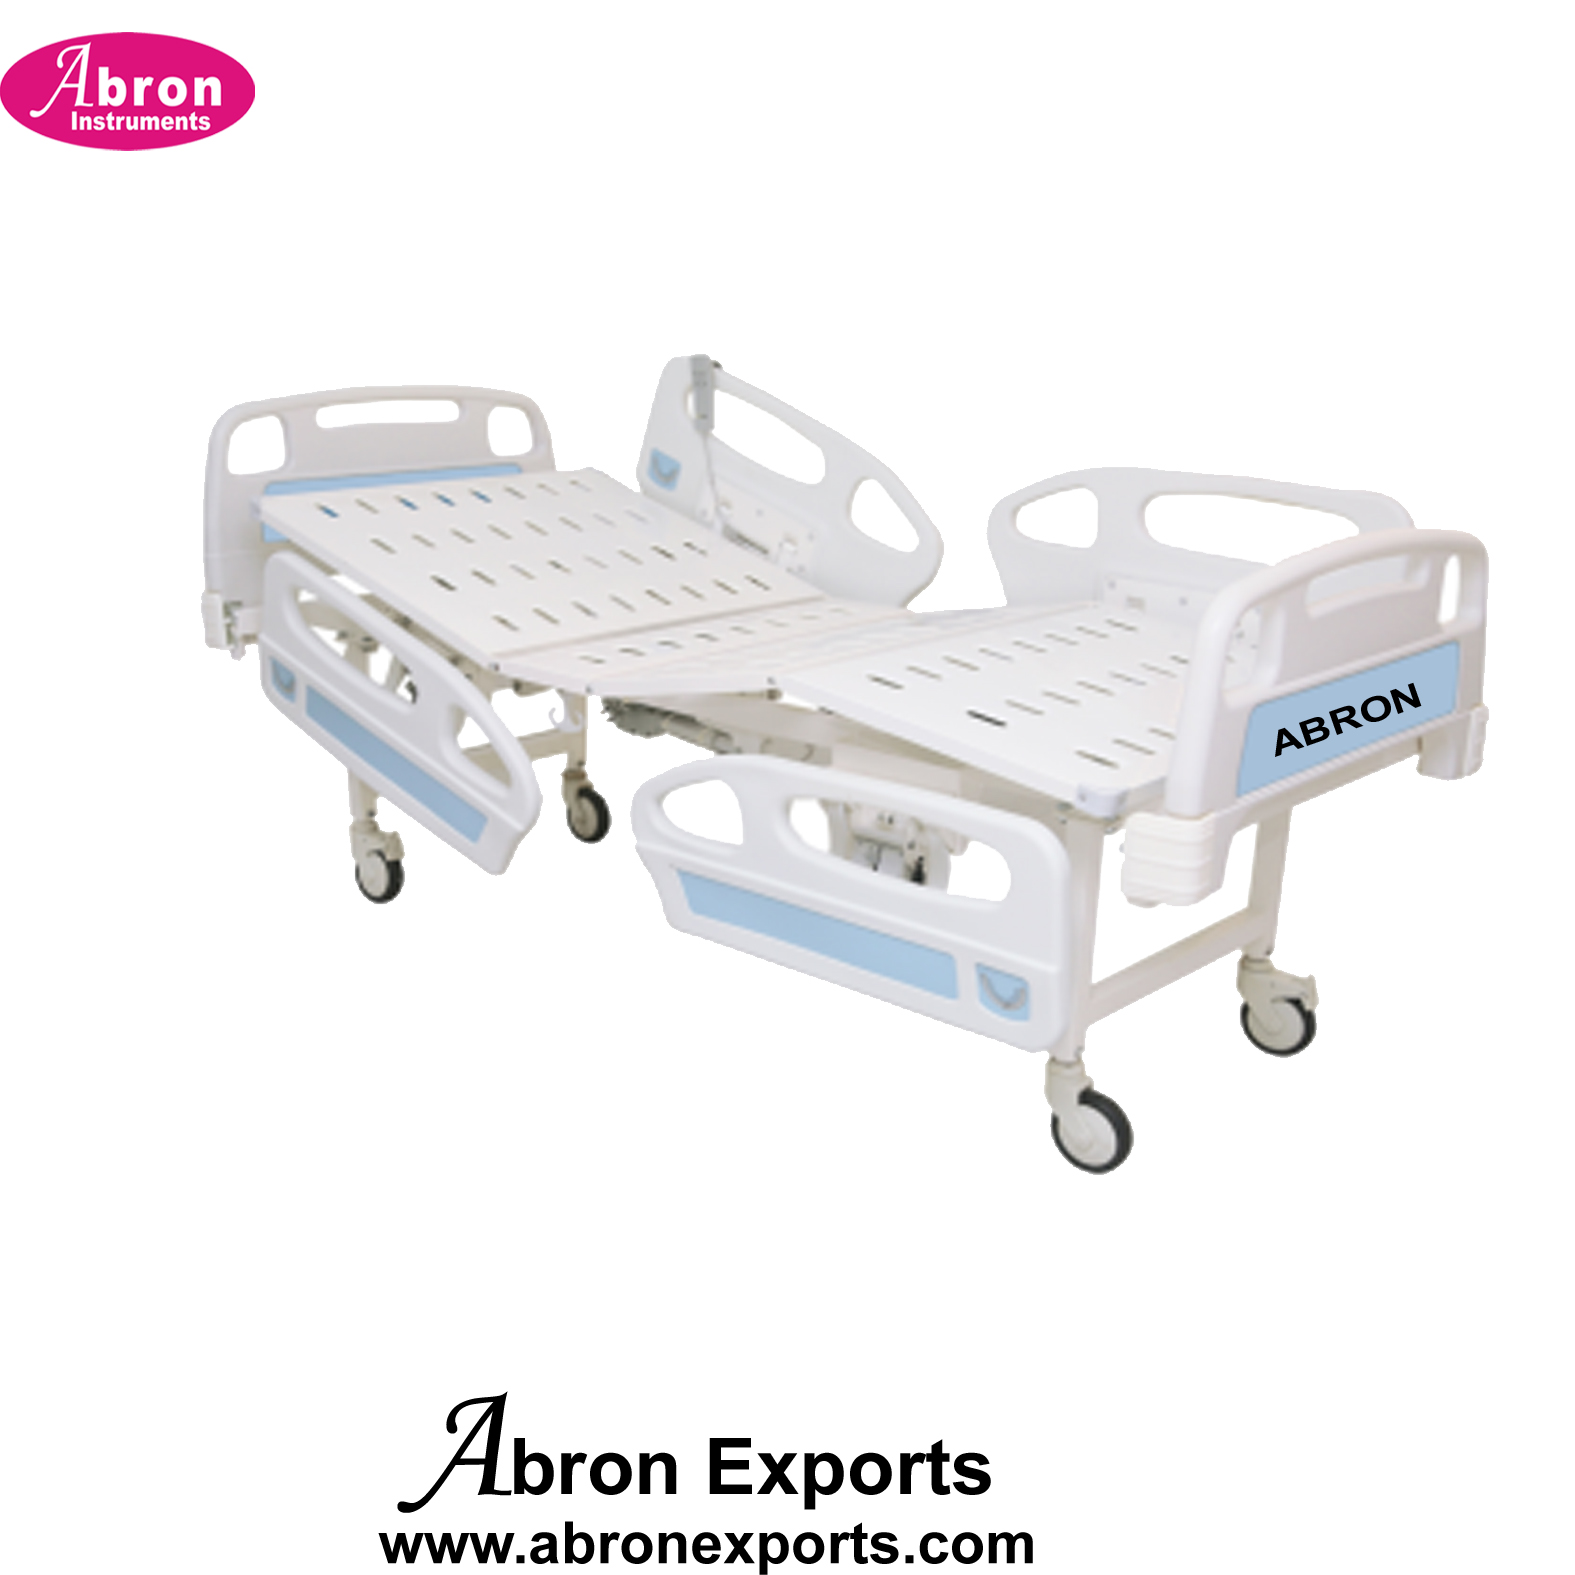 Patient Stretcher Electric with Fowler Bed 2 function 4 Wheel Electric Motor Hospital Furniture U84 Abron ABM-2261SE2 